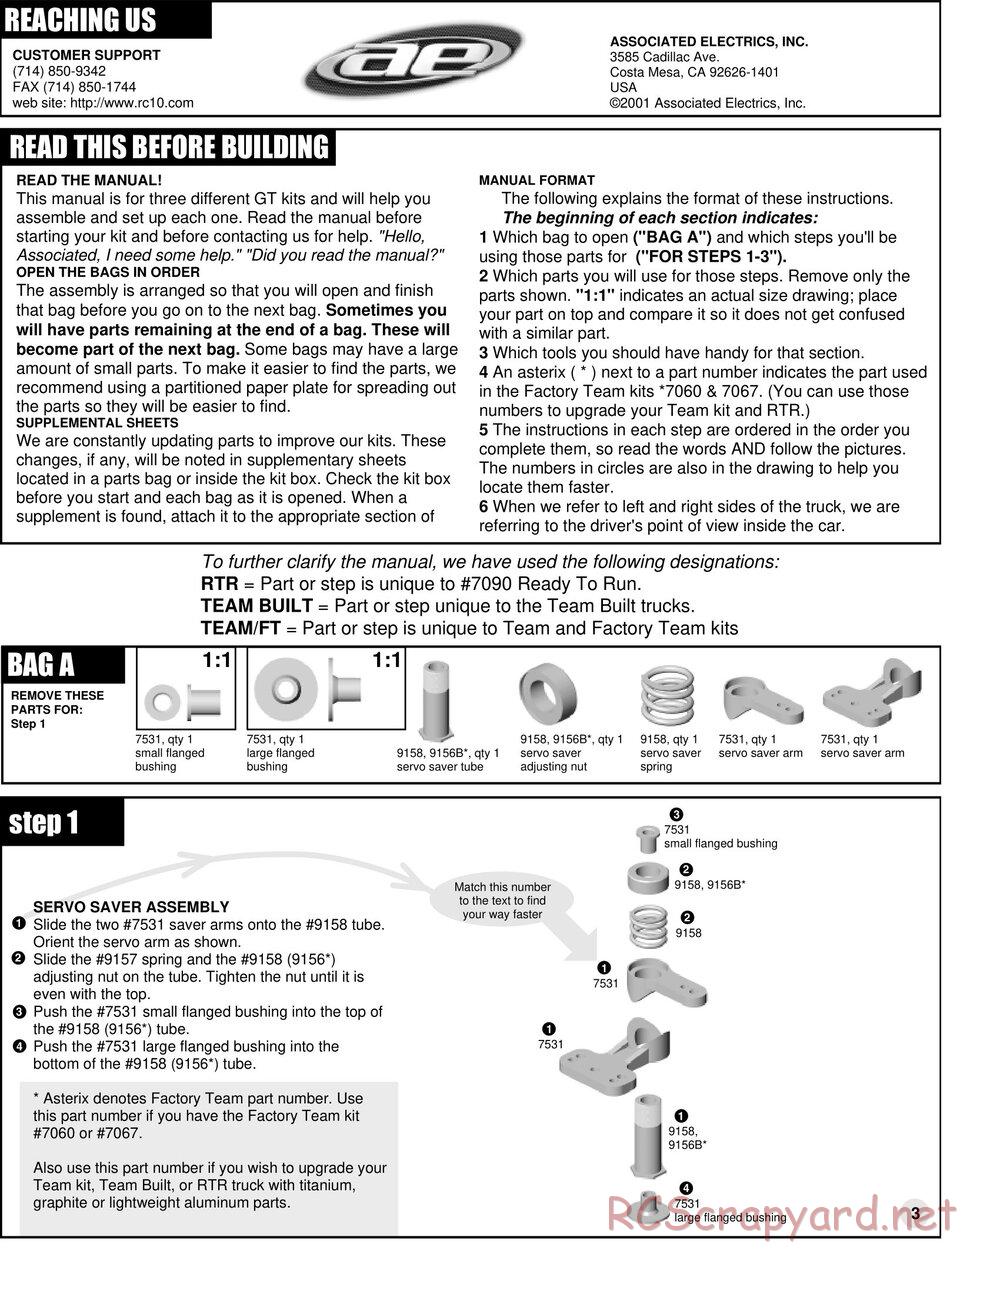 Team Associated - RC10GT Team Built - Manual - Page 3